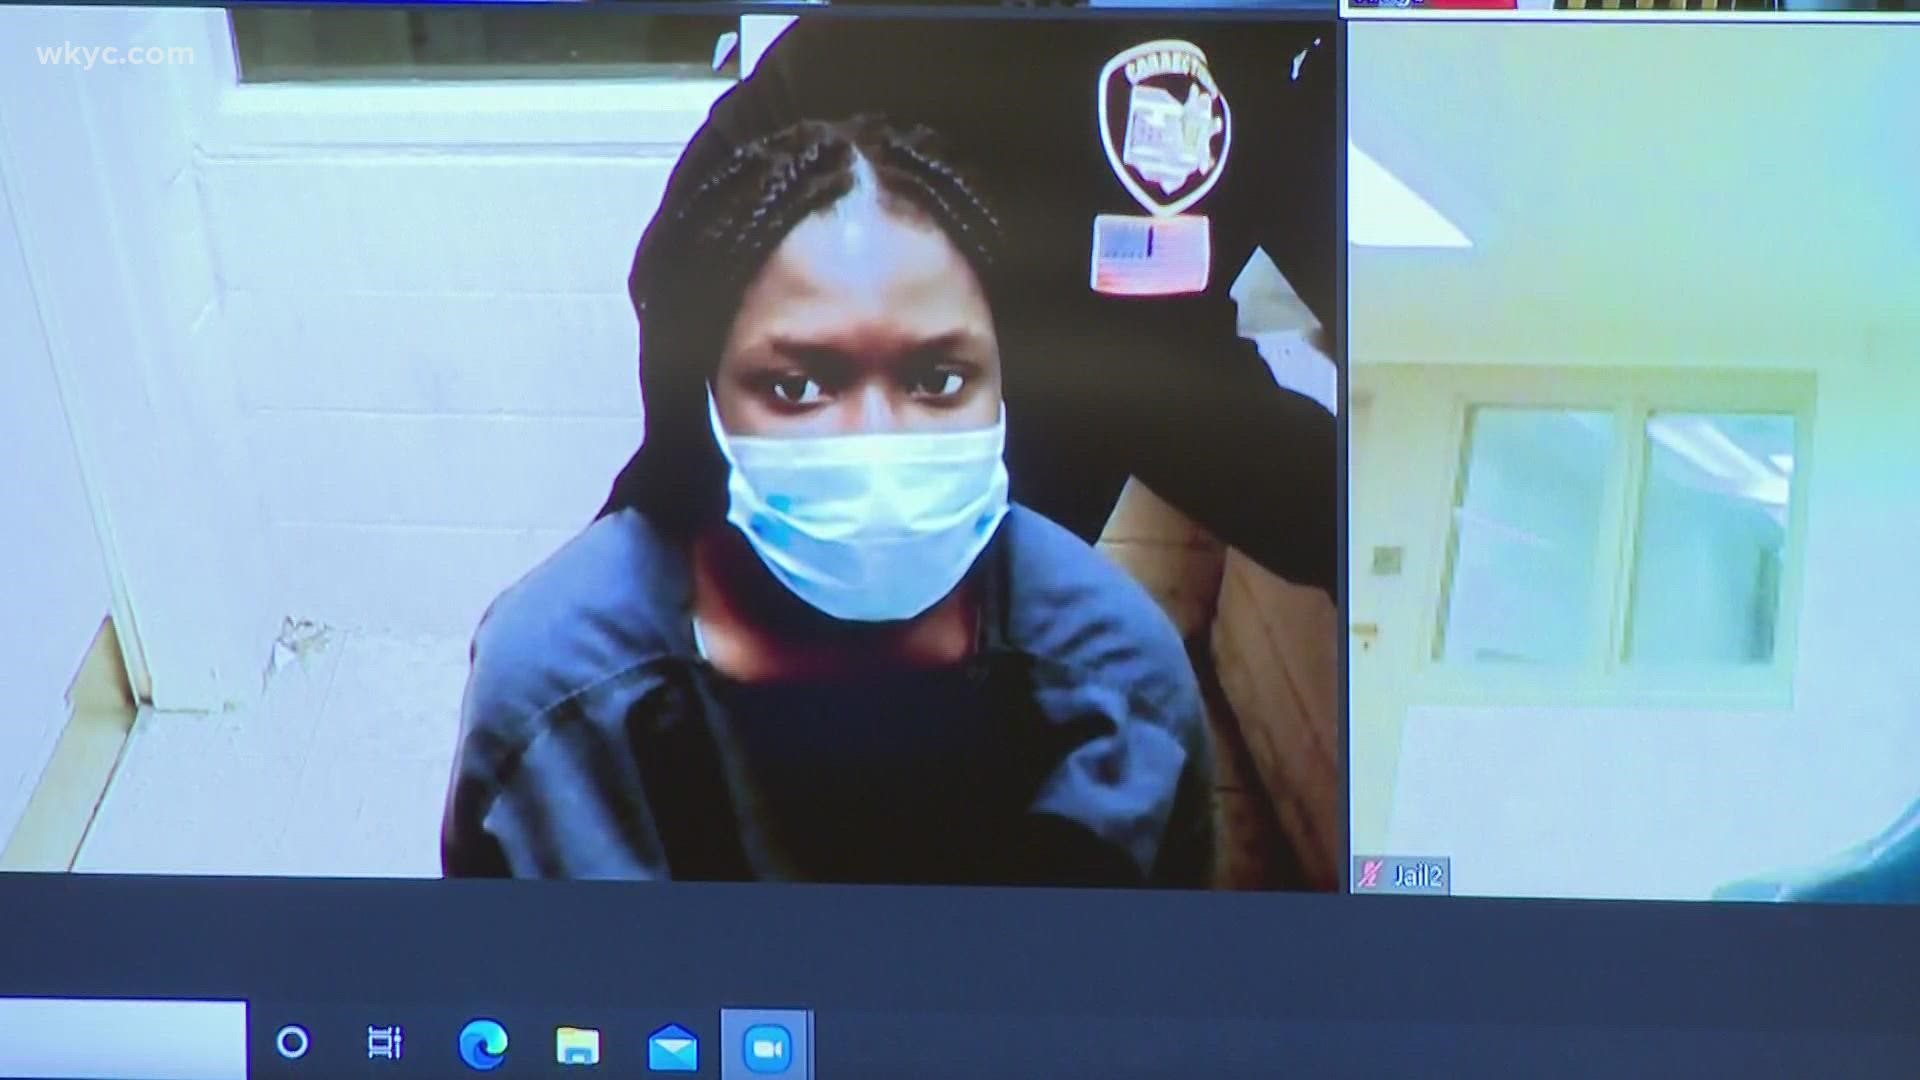 18-year-old Tamara McLoyd is charged with aggravated murder in the case.